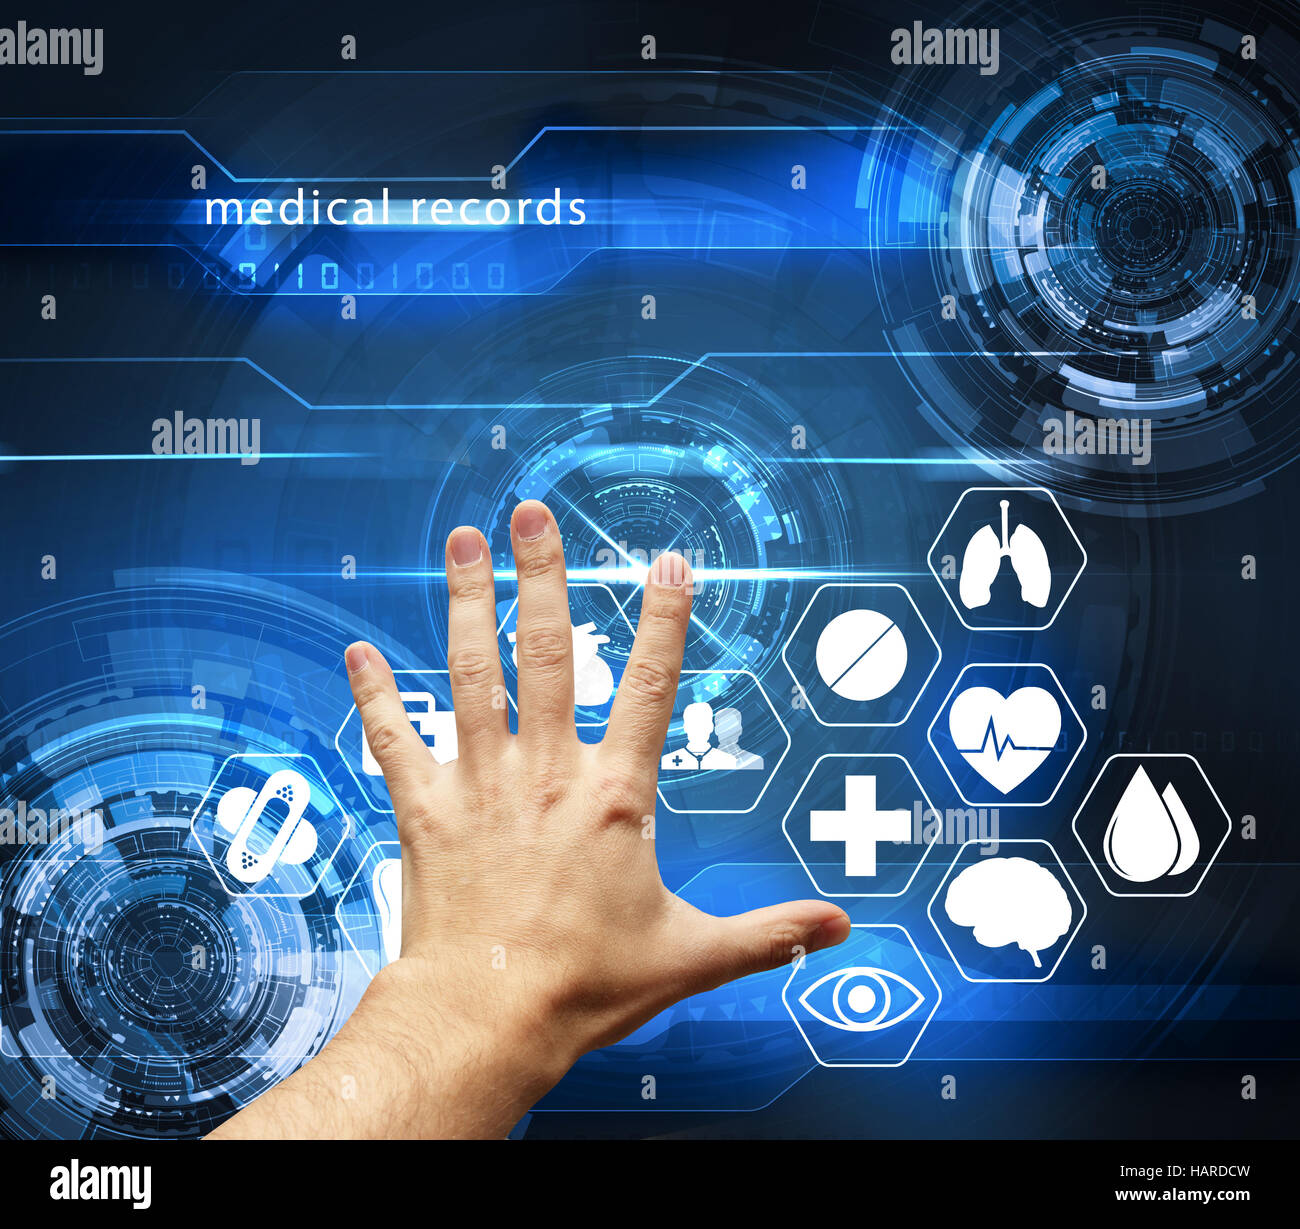 hand touching futuristic interface with medical records - medical health care concept Stock Photo